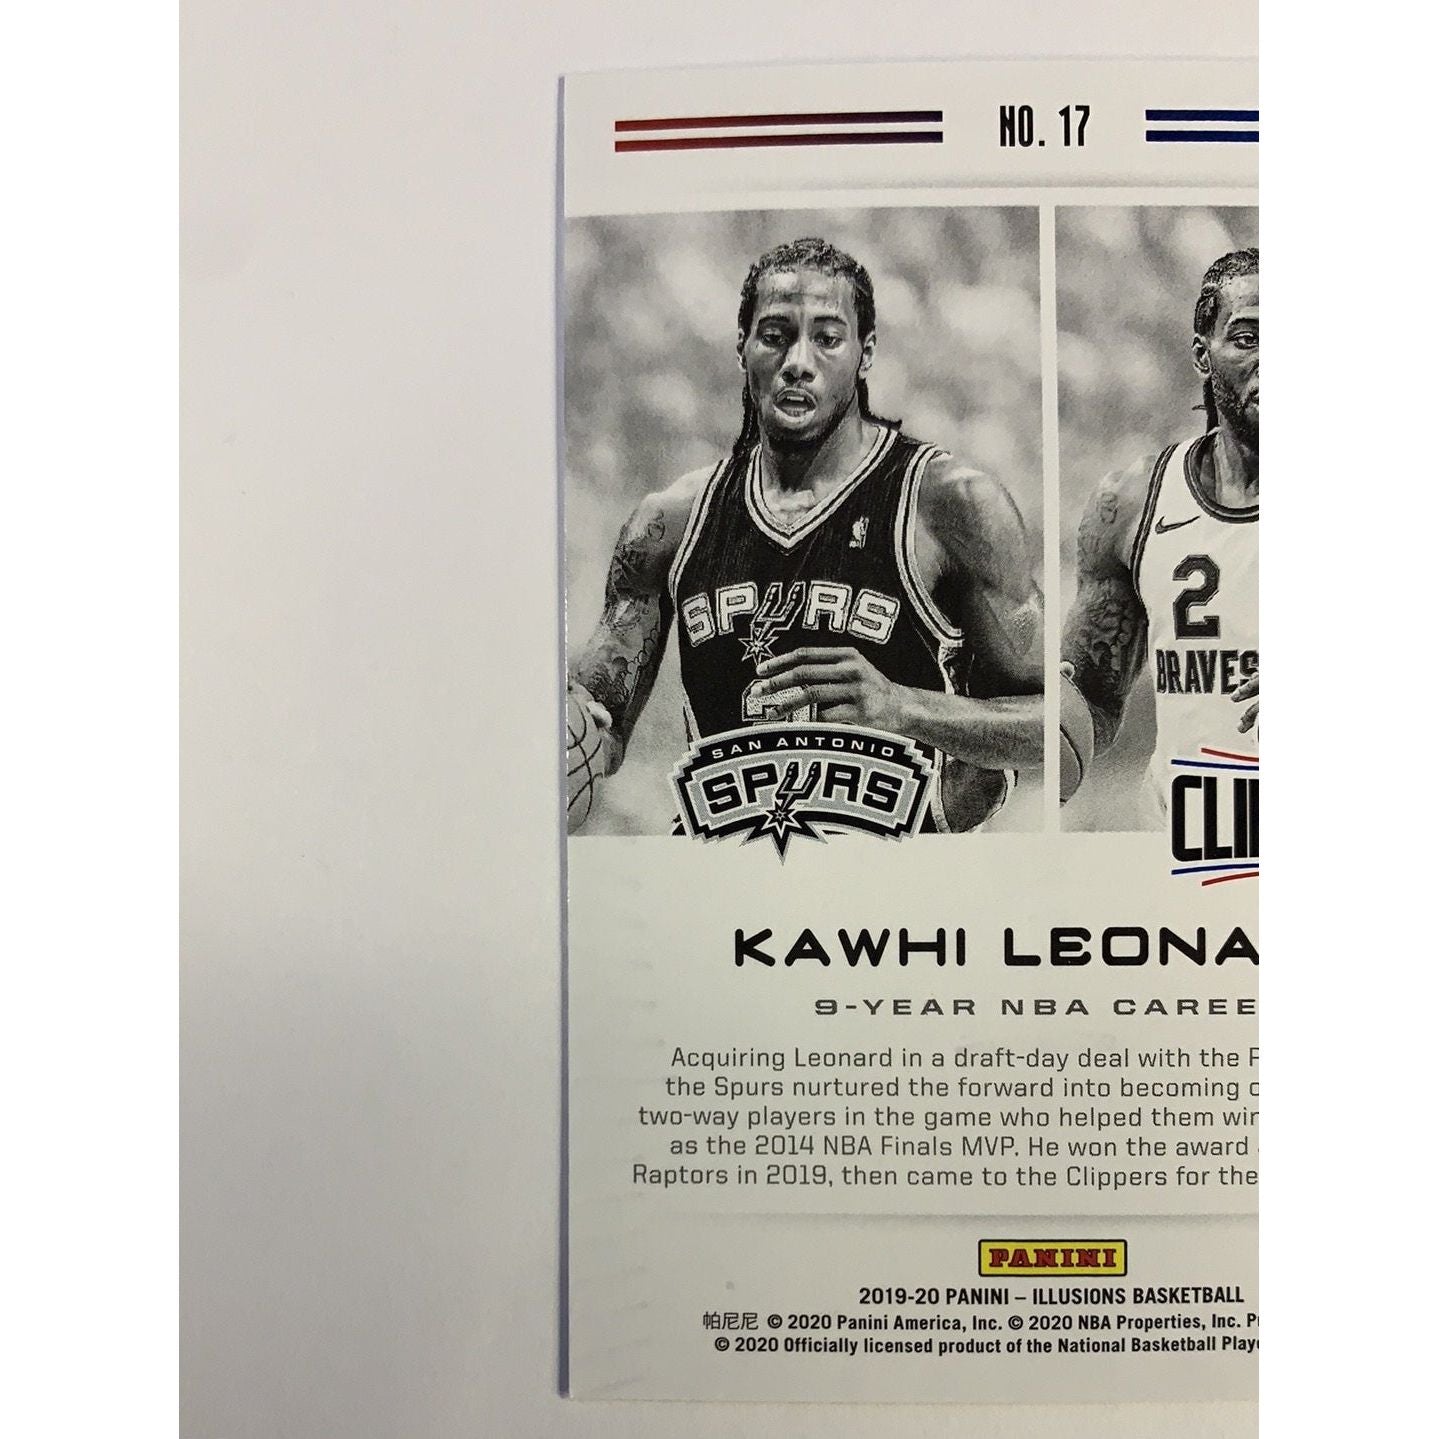  2019-20 Illusions Career Lineage Kawhi Leonard  Local Legends Cards & Collectibles